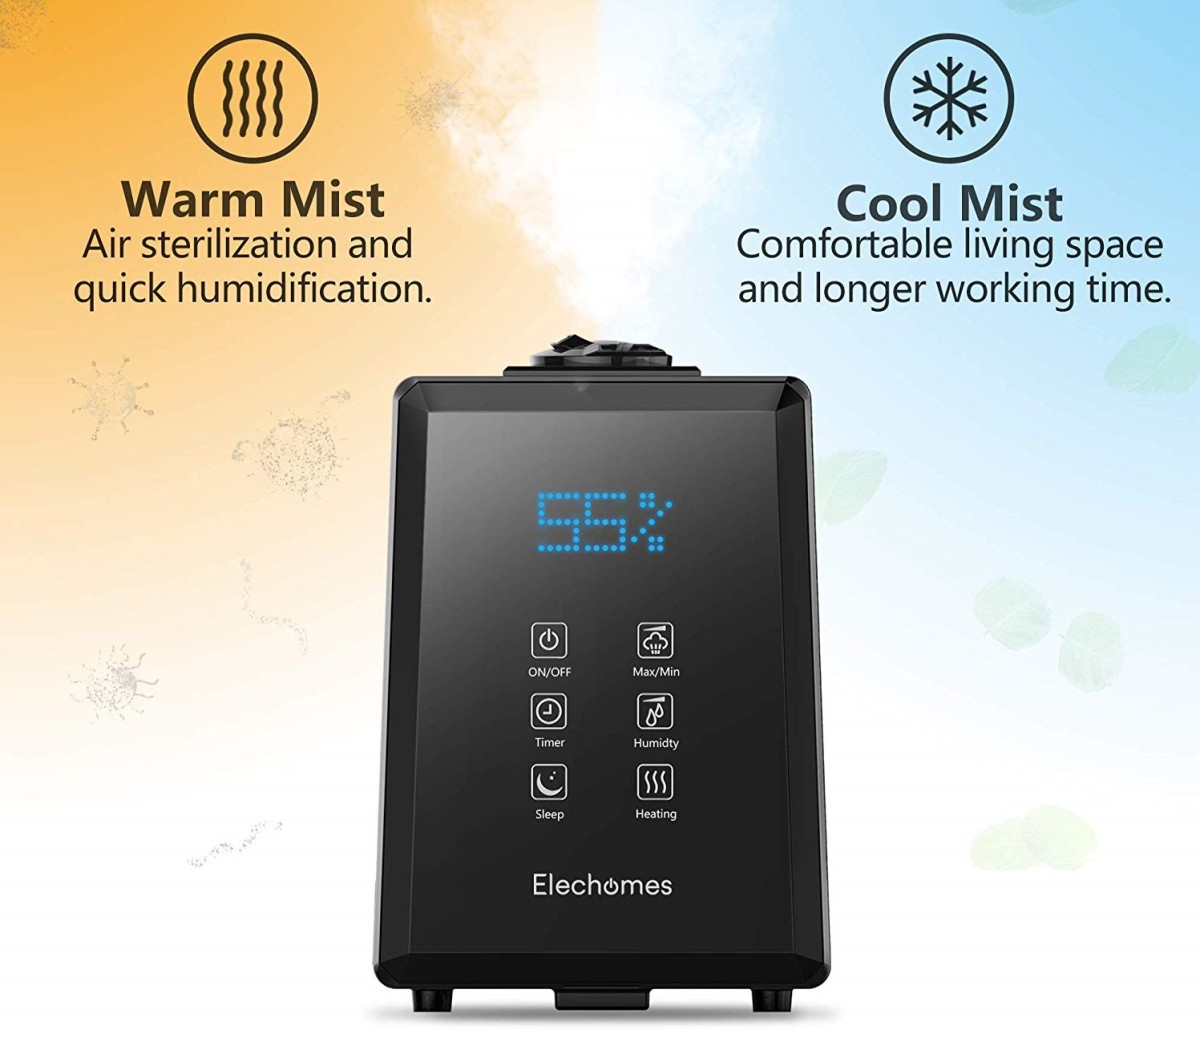 You can choose from warm and cool mist settings.